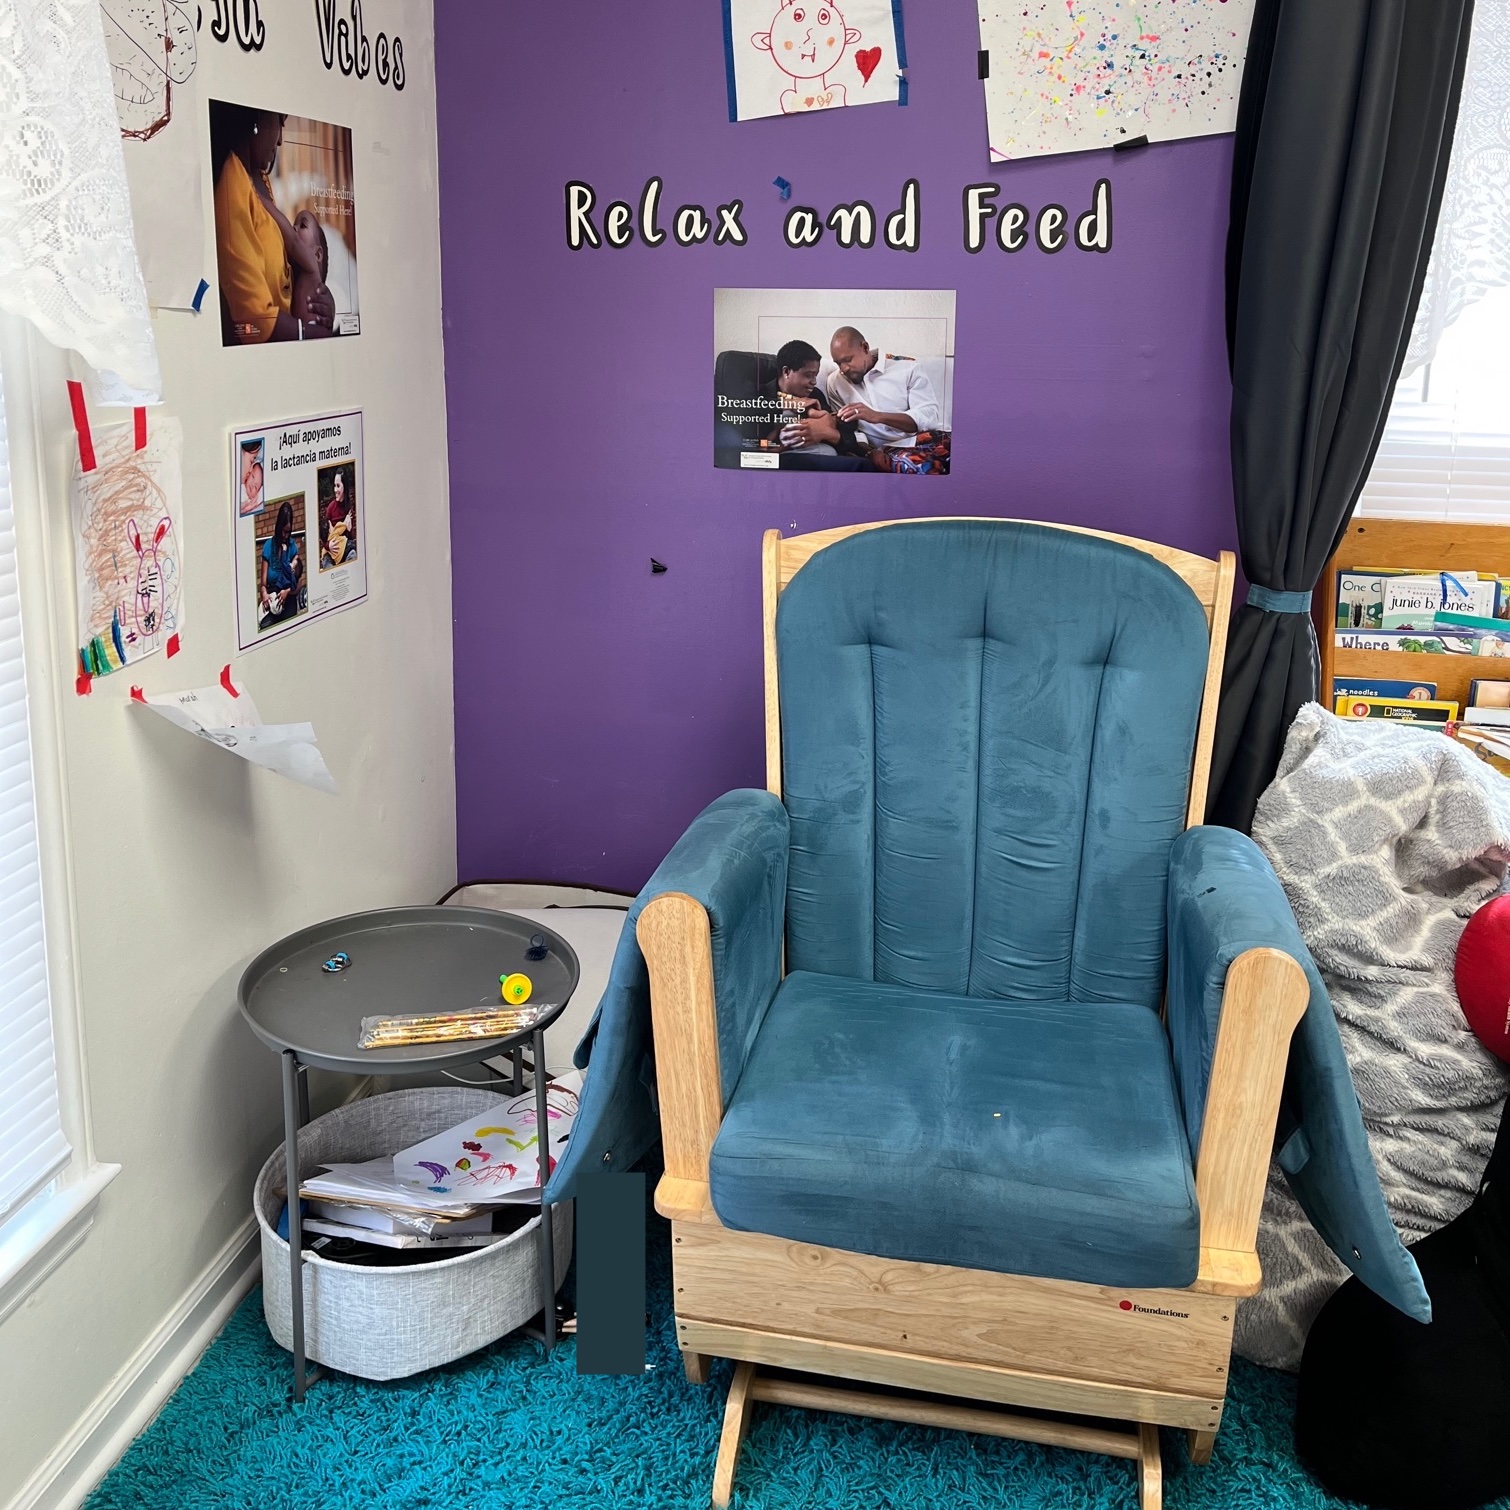 Image of lactation space with rocking chair, small table, and pictures on the wall